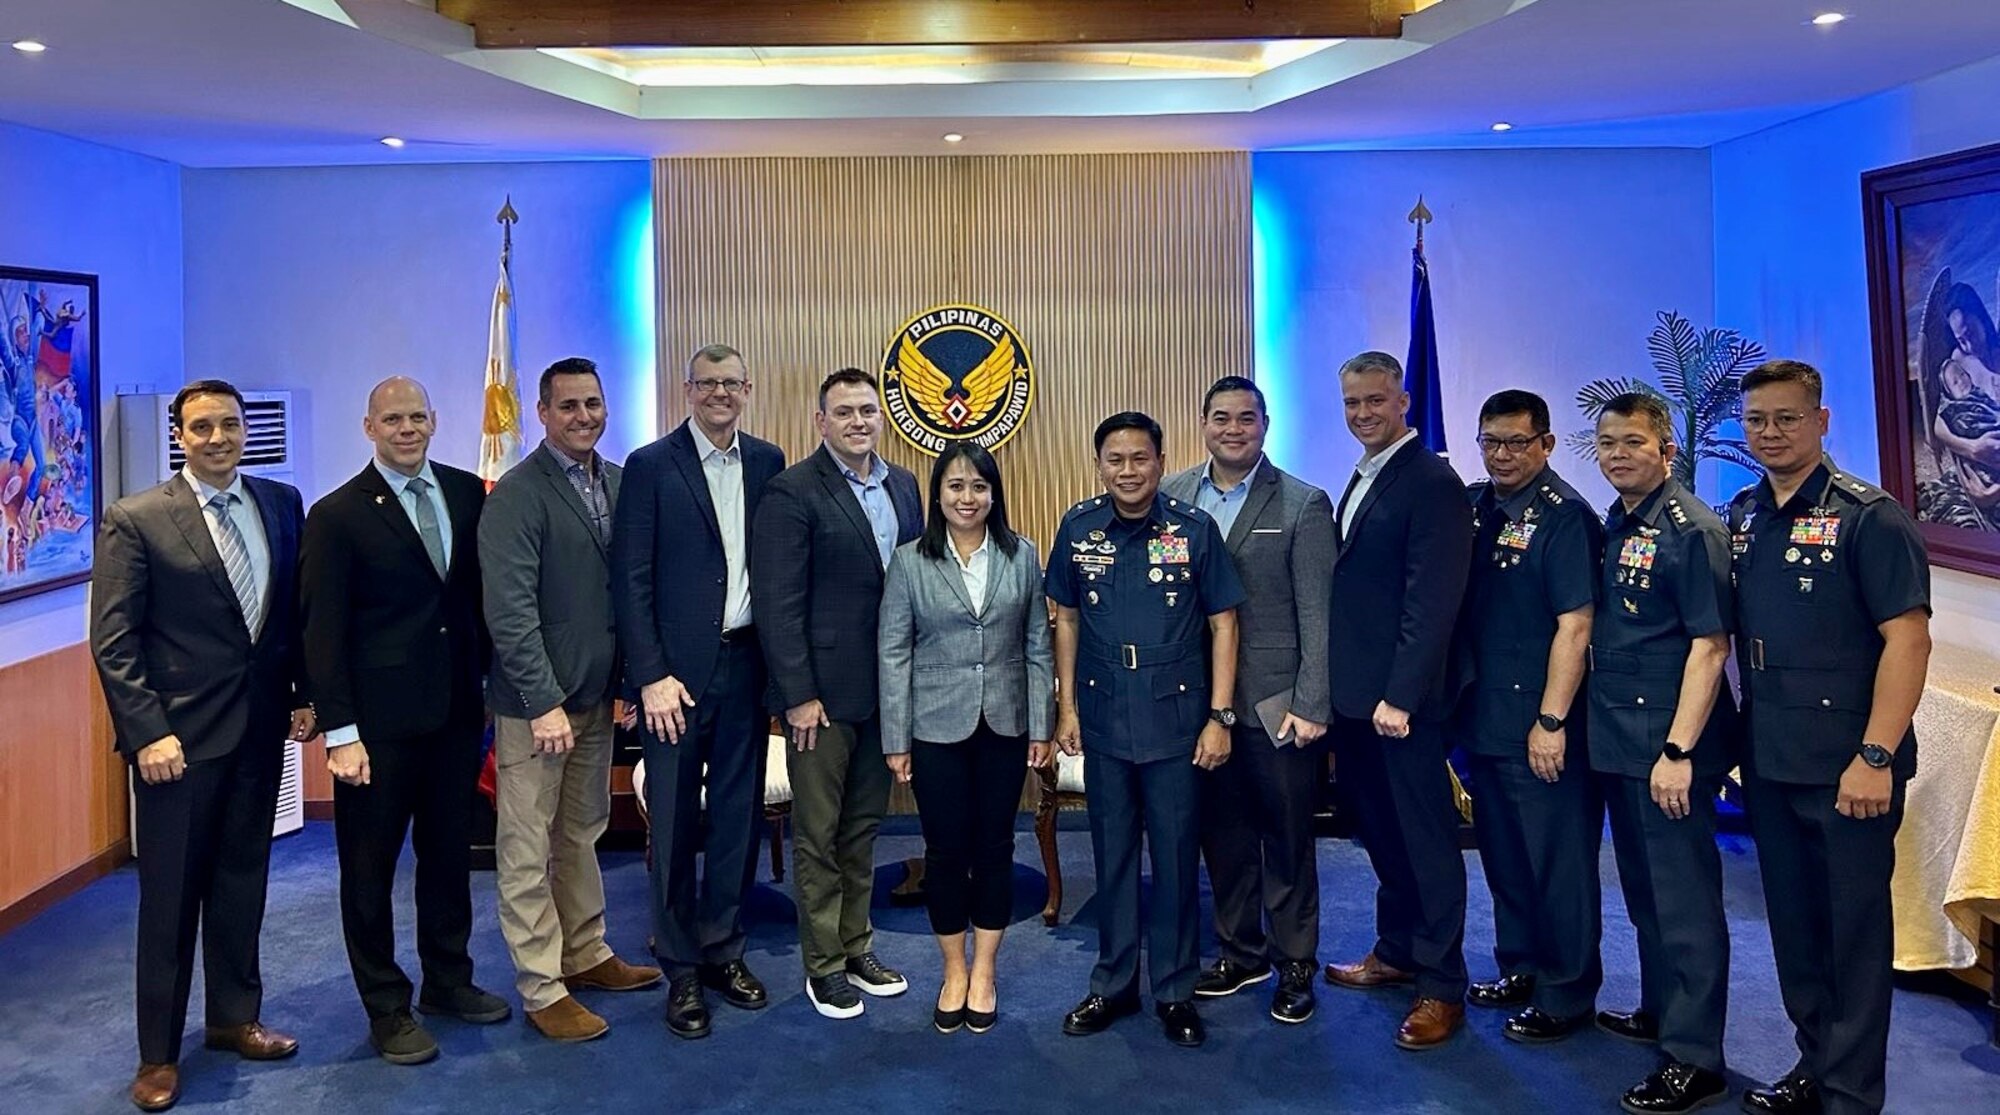 Air War College Regional Securities Studies cohort visited the Philippine Air Force Headquarters with Brig. Gen. Fabian M. Pedregosa, Philippine Air Forces Chief of Staff, accompanied by Tagalog Language Enabled Airman Program Scholar Capt. Piara Swank. (Courtesy photo)